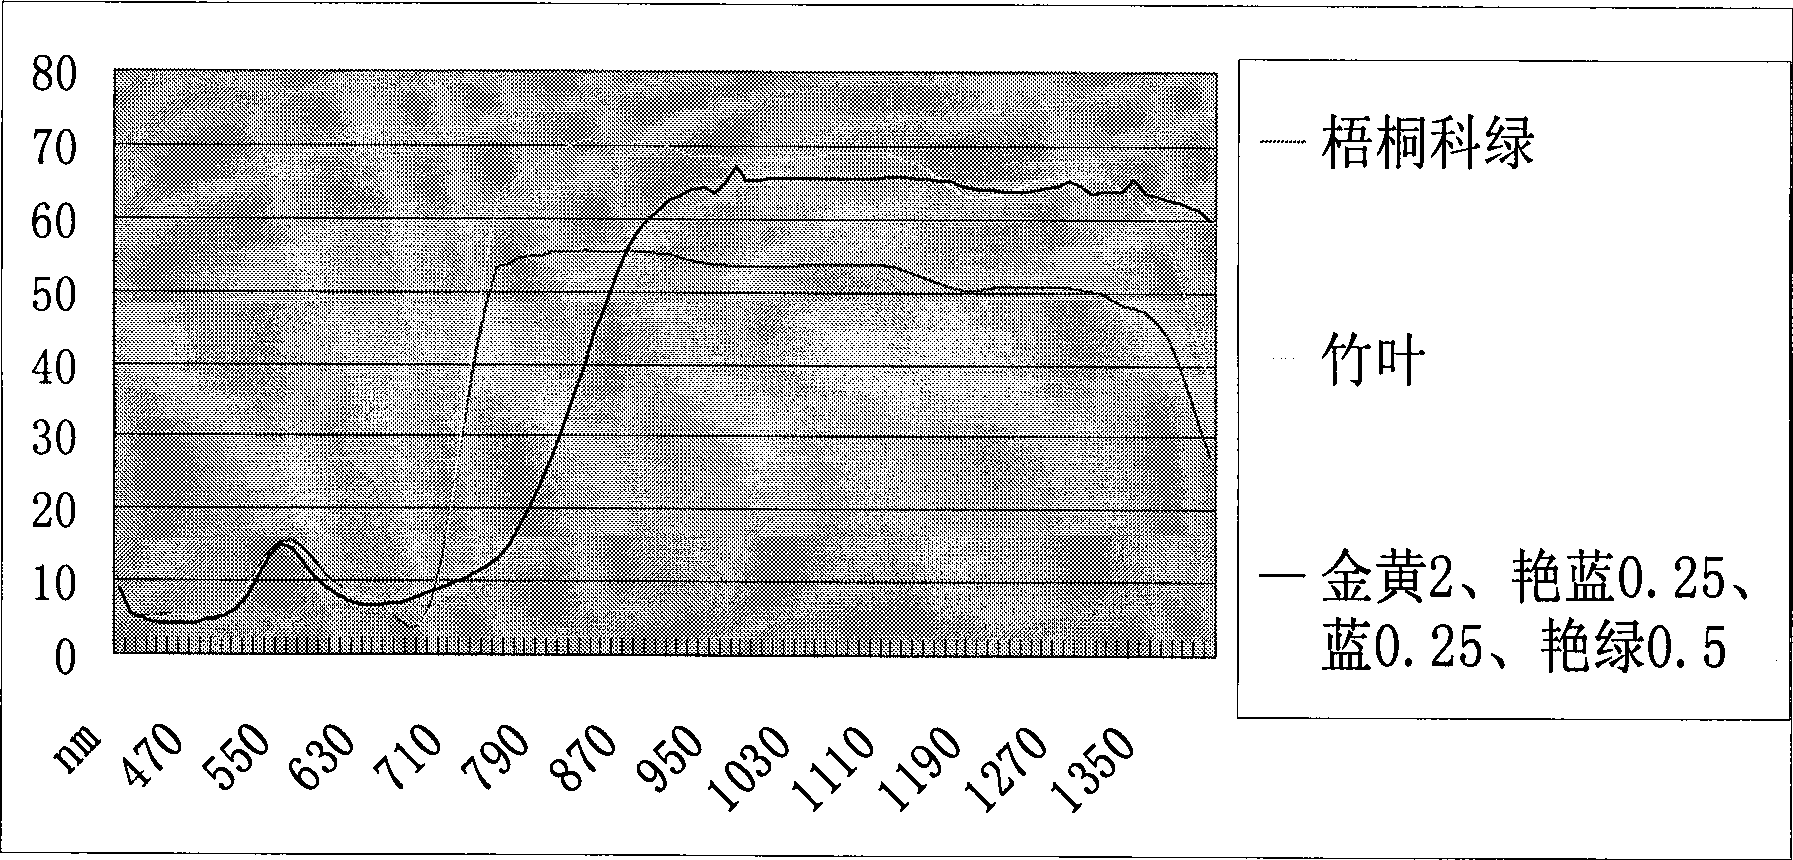 Method for preparing near-infrared concealed cotton textiles